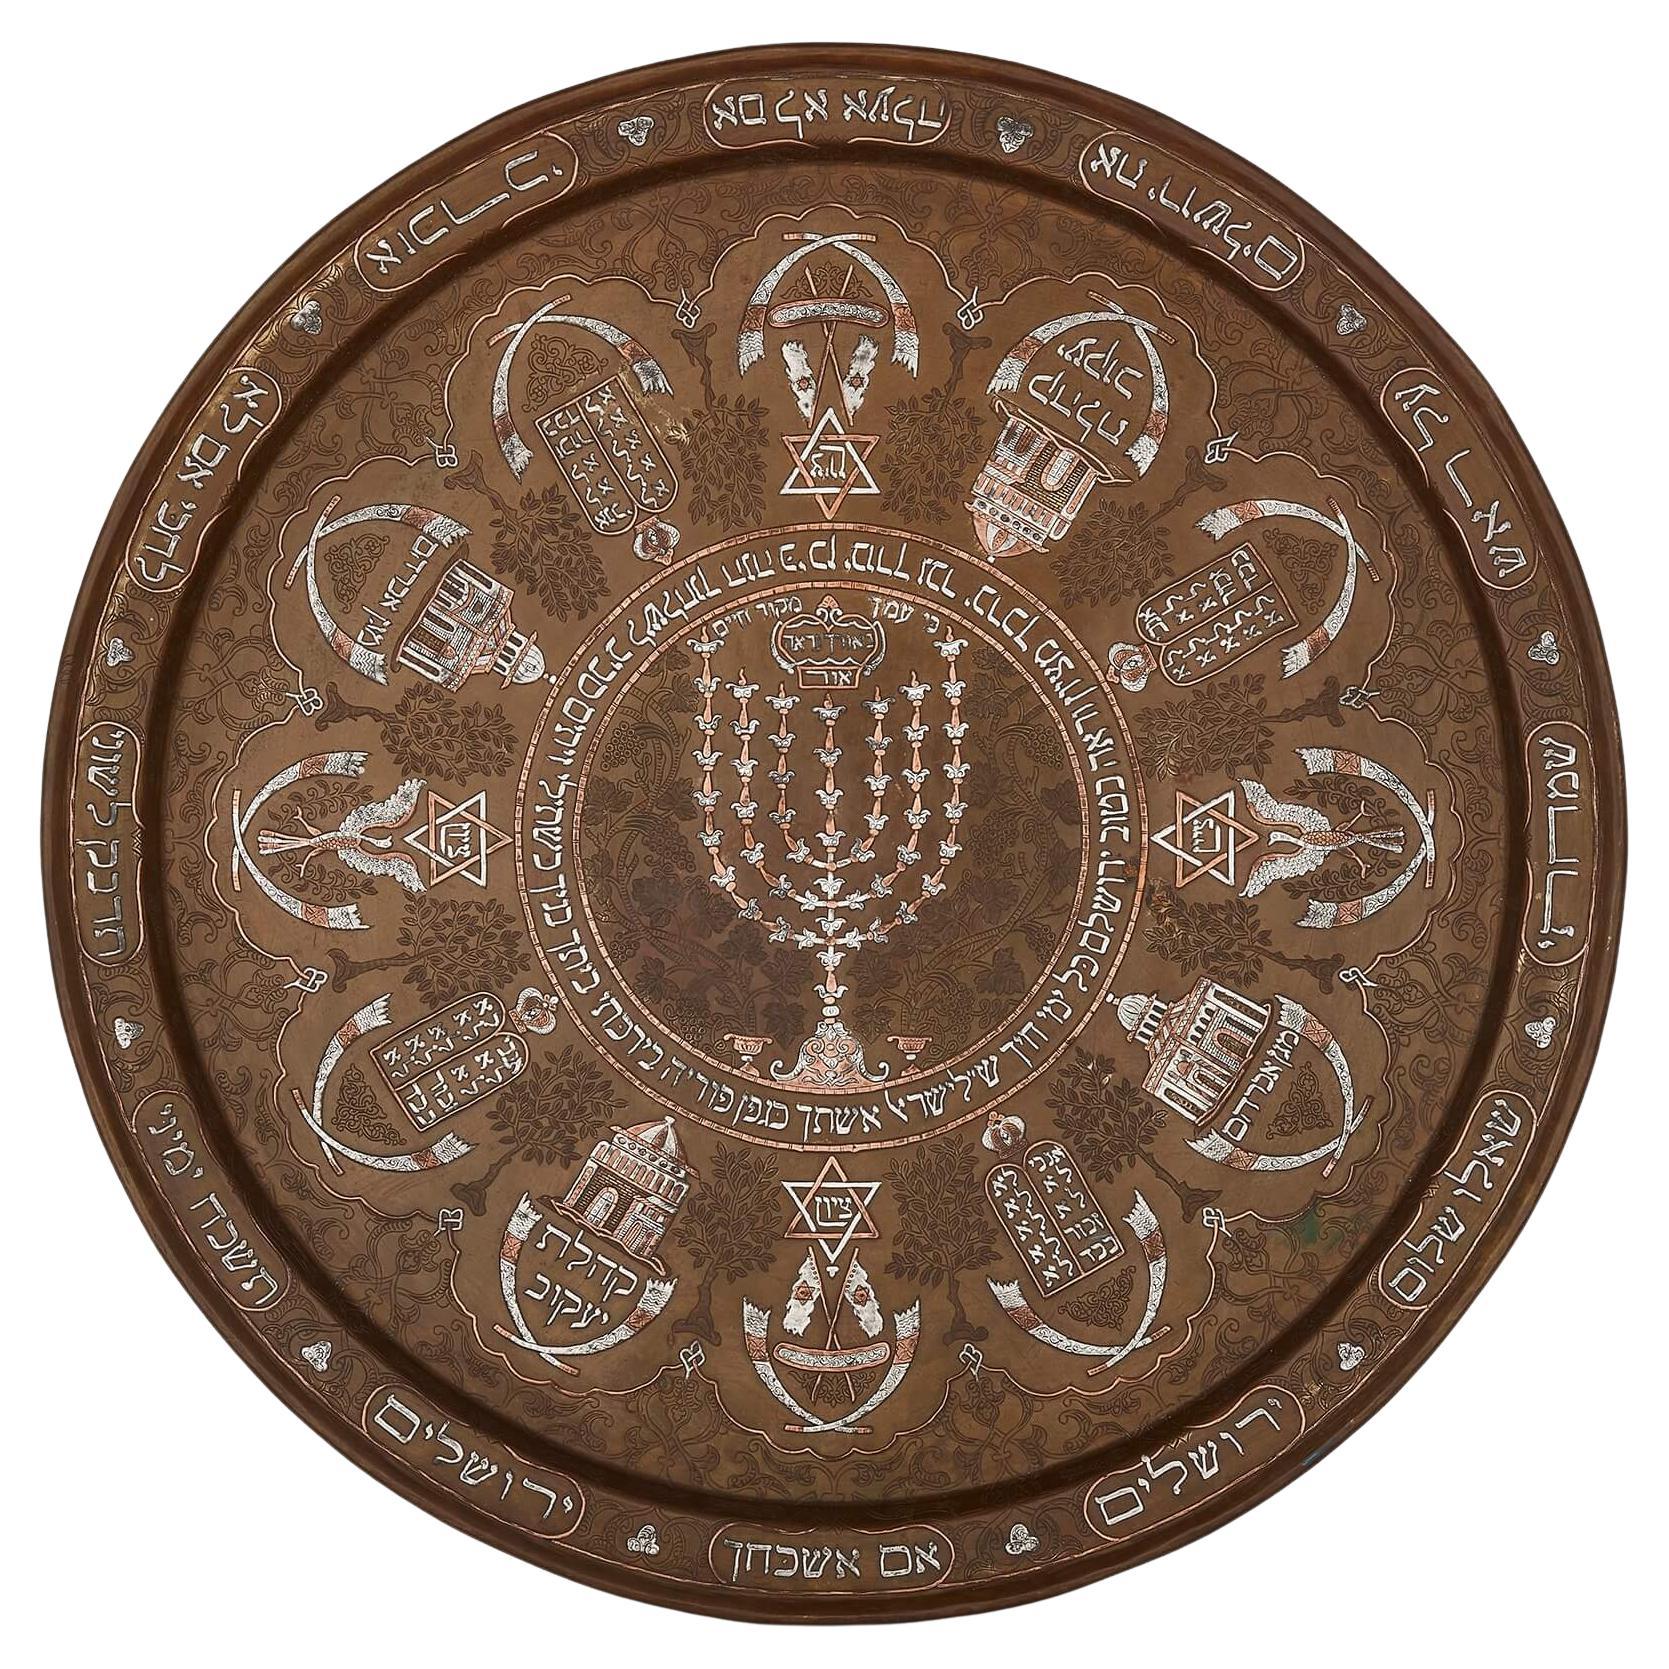 Large and Very Rare Silver-Inlaid Antique Judaica Tray